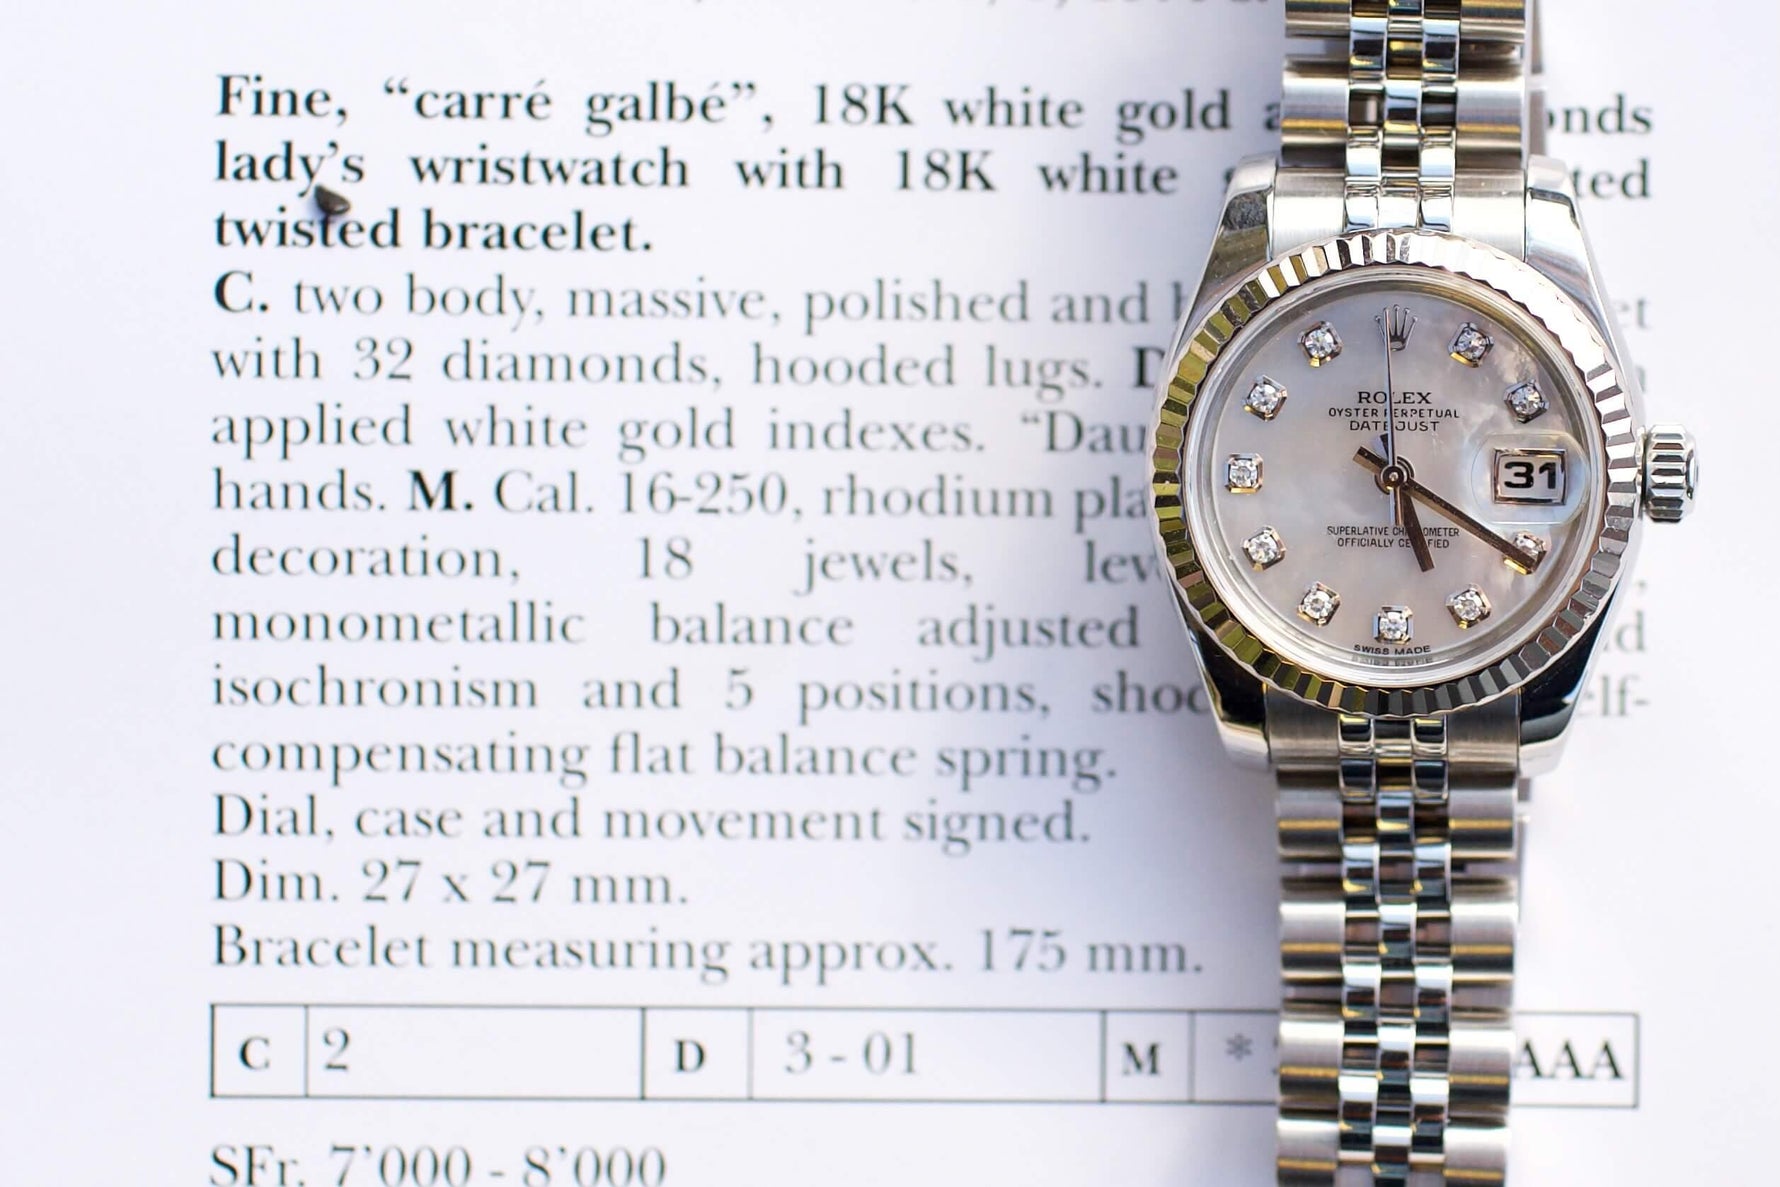 SOLD OUT: Rolex Womens Datejust 26mm 179174 Factory Mother of Pearl Dial Jubilee - WearingTime Luxury Watches